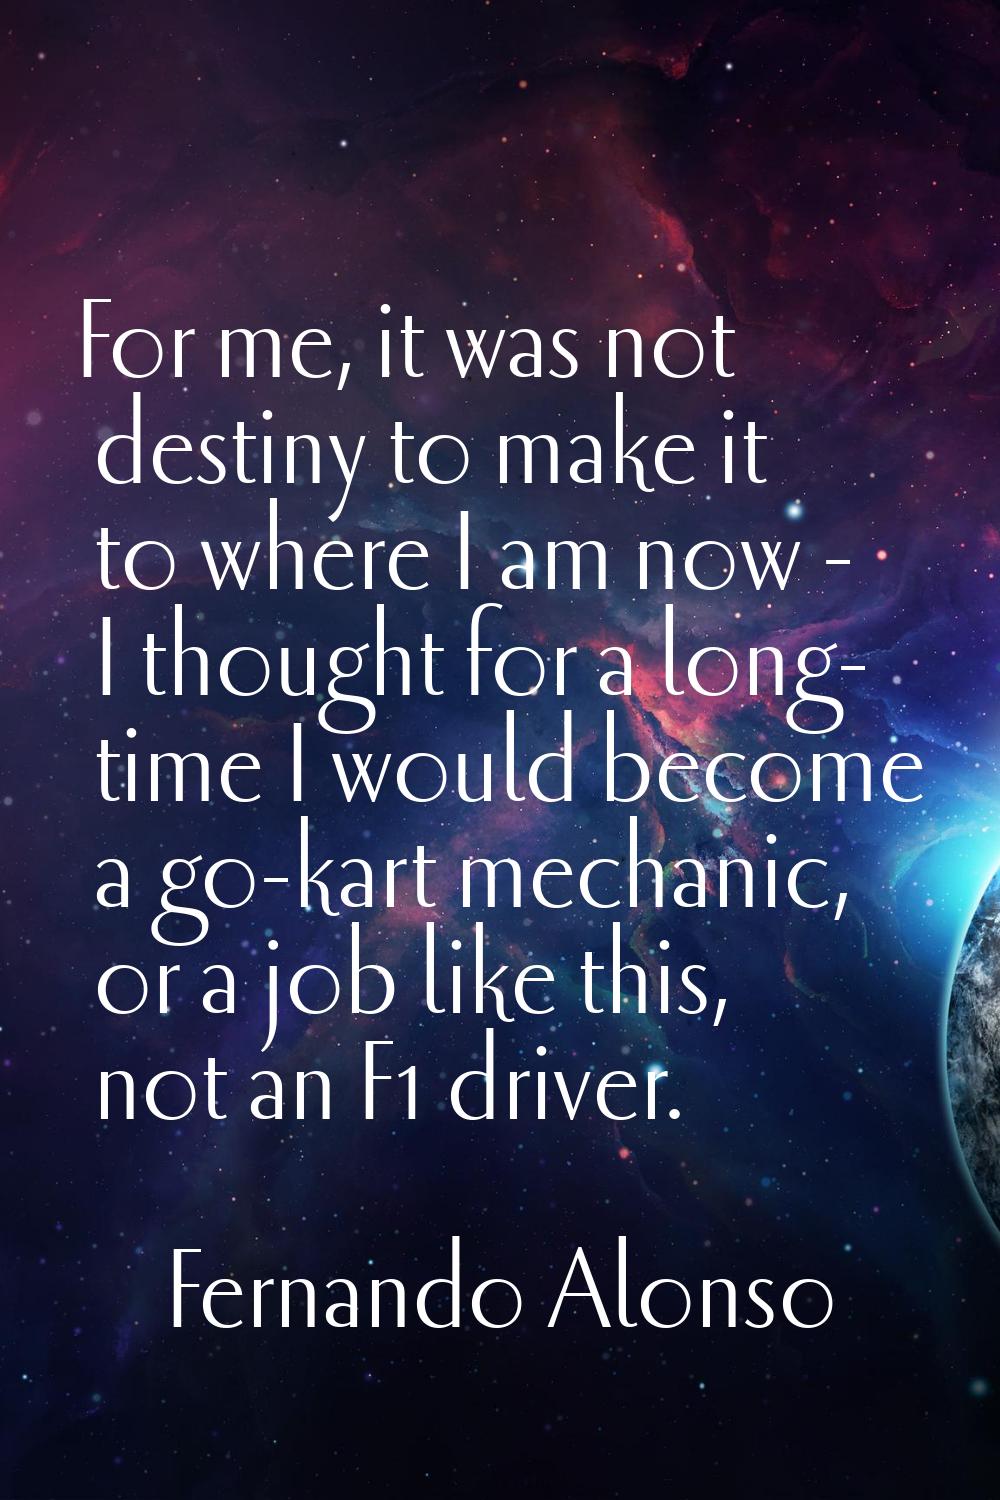 For me, it was not destiny to make it to where I am now - I thought for a long- time I would become